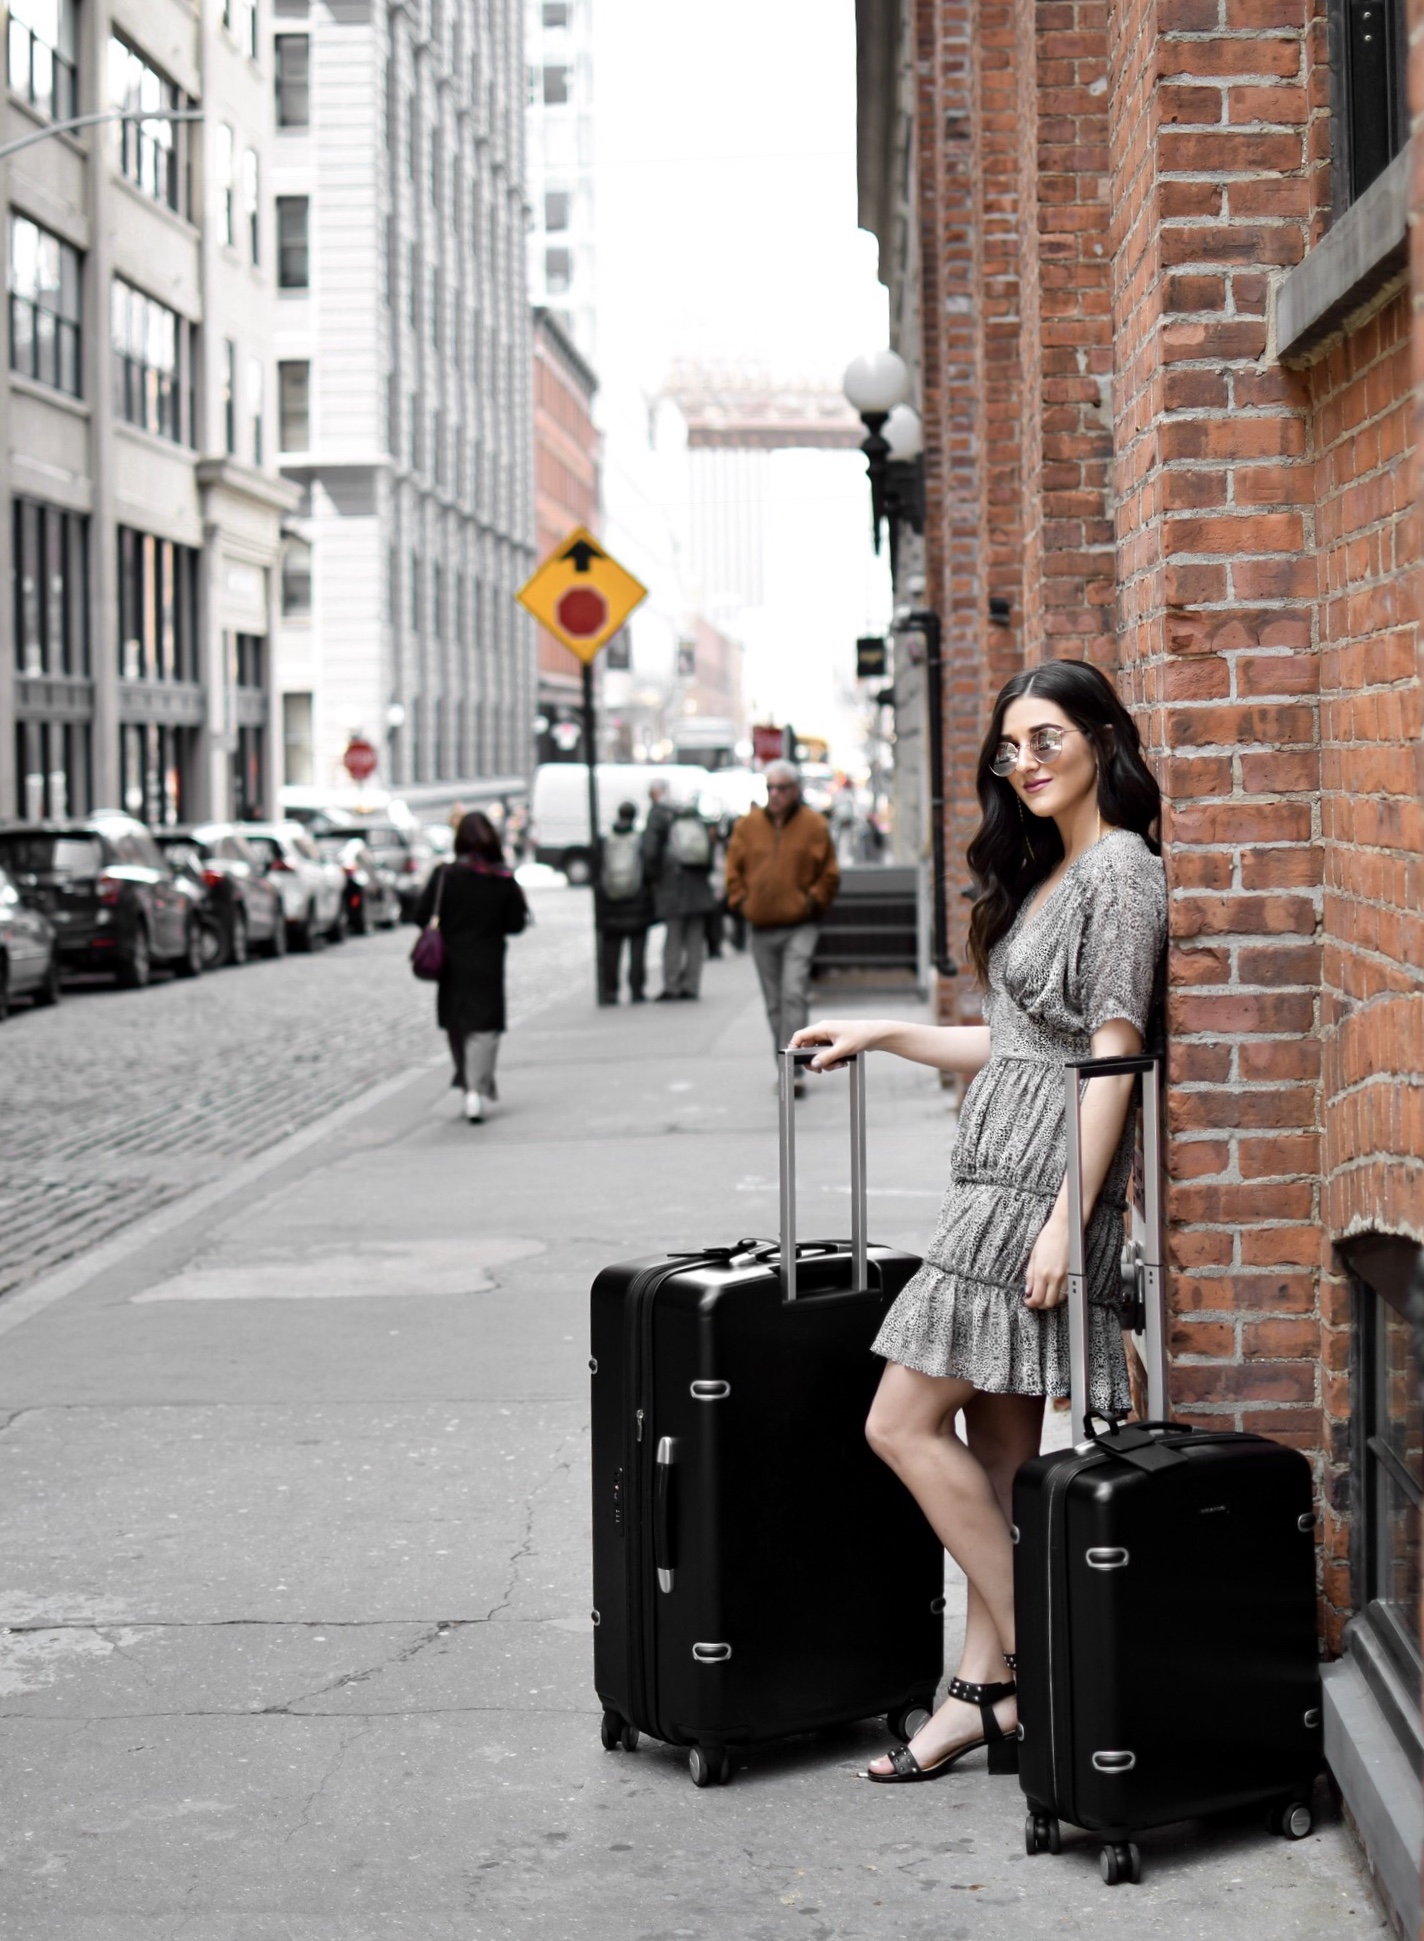 The Perfect Honeymoon Luggage Ricardo Beverly Hills Arris Collection Esther Santer Fashion Blog NYC Street Style Blogger Outfit OOTD Trendy Suitcase Compartment Interior Black Sandals Studs ASOS Convenient Vacation New York City Skyline Dumbo Europe.jpg